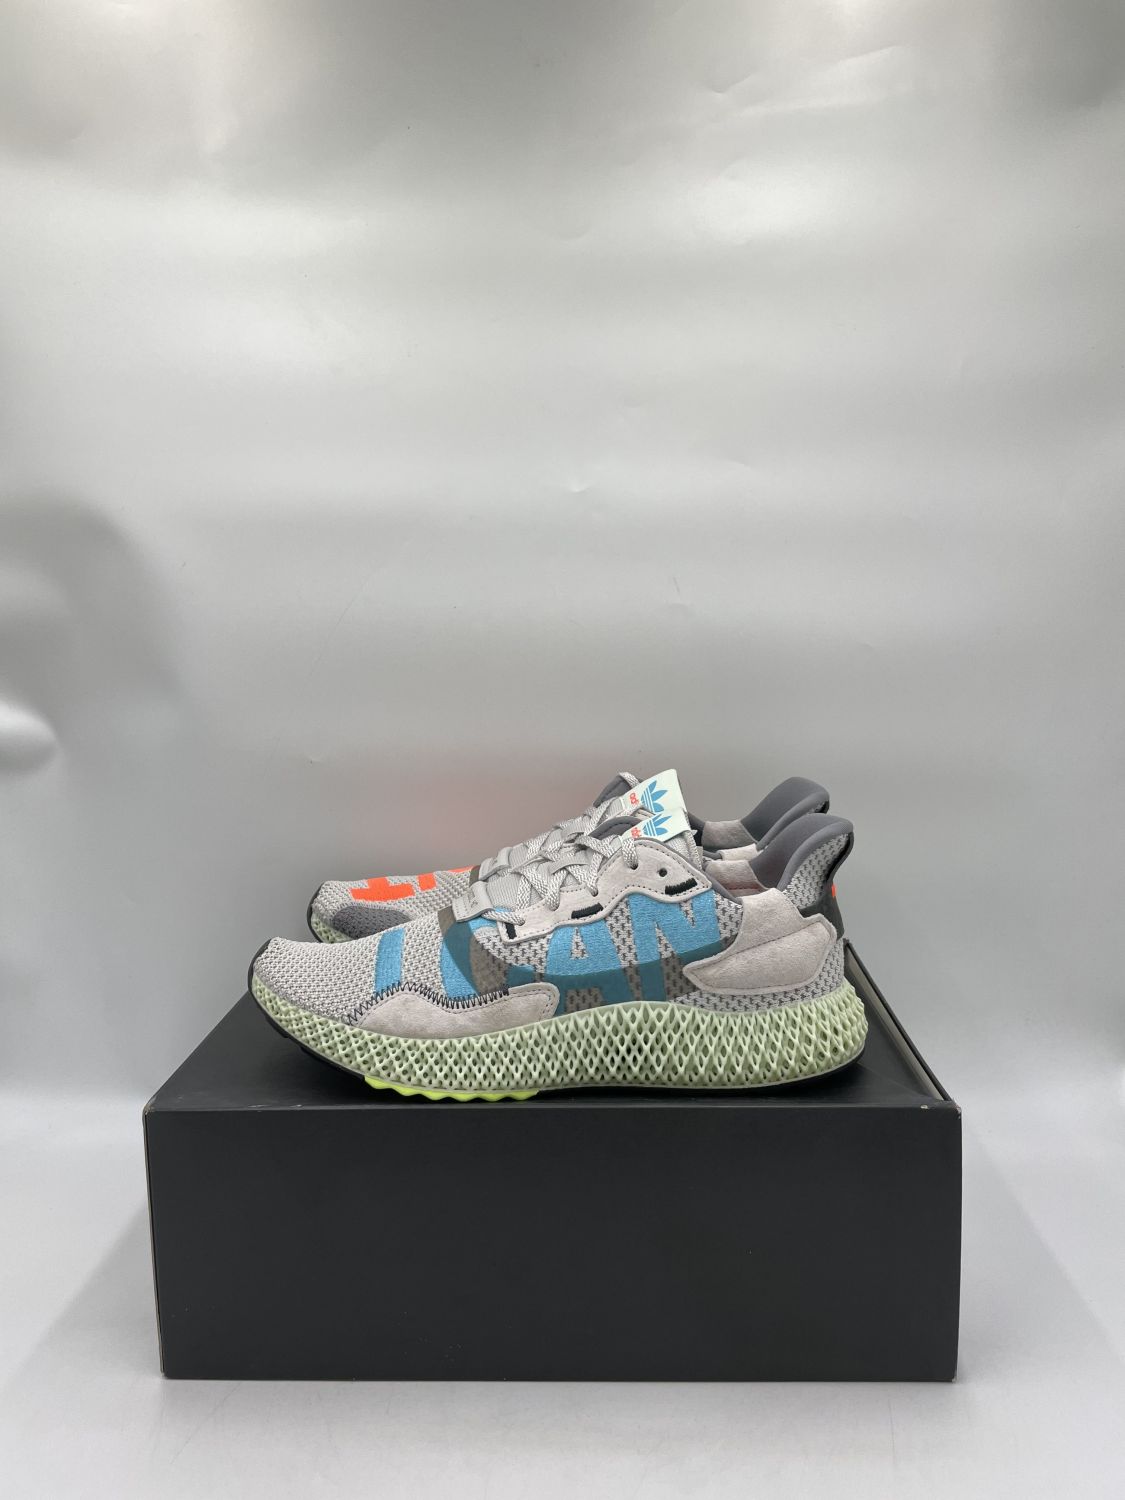 Adidas ZX 4000 4D I Want I Can | AfterMarket